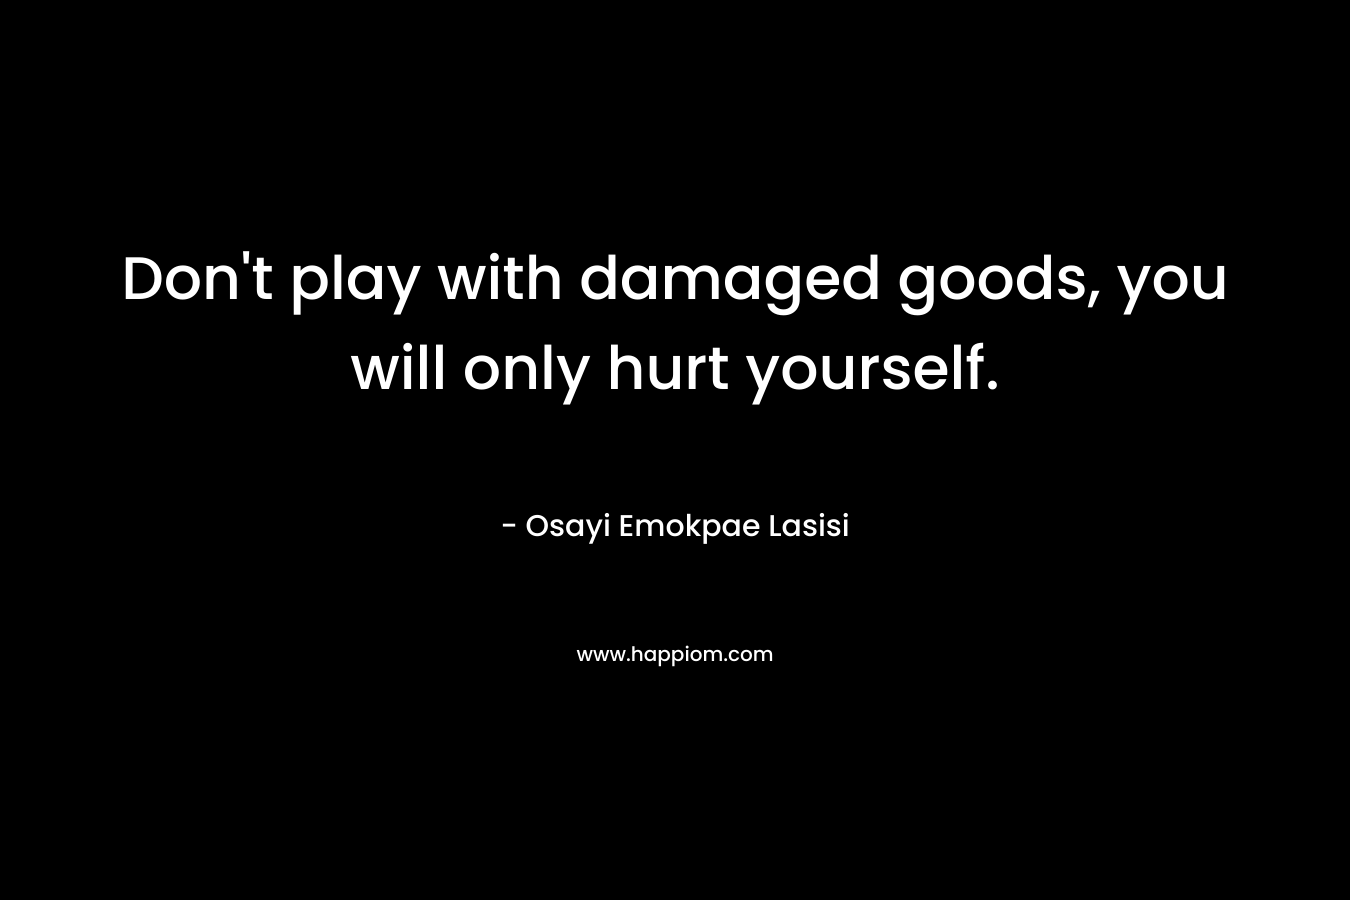 Don't play with damaged goods, you will only hurt yourself.